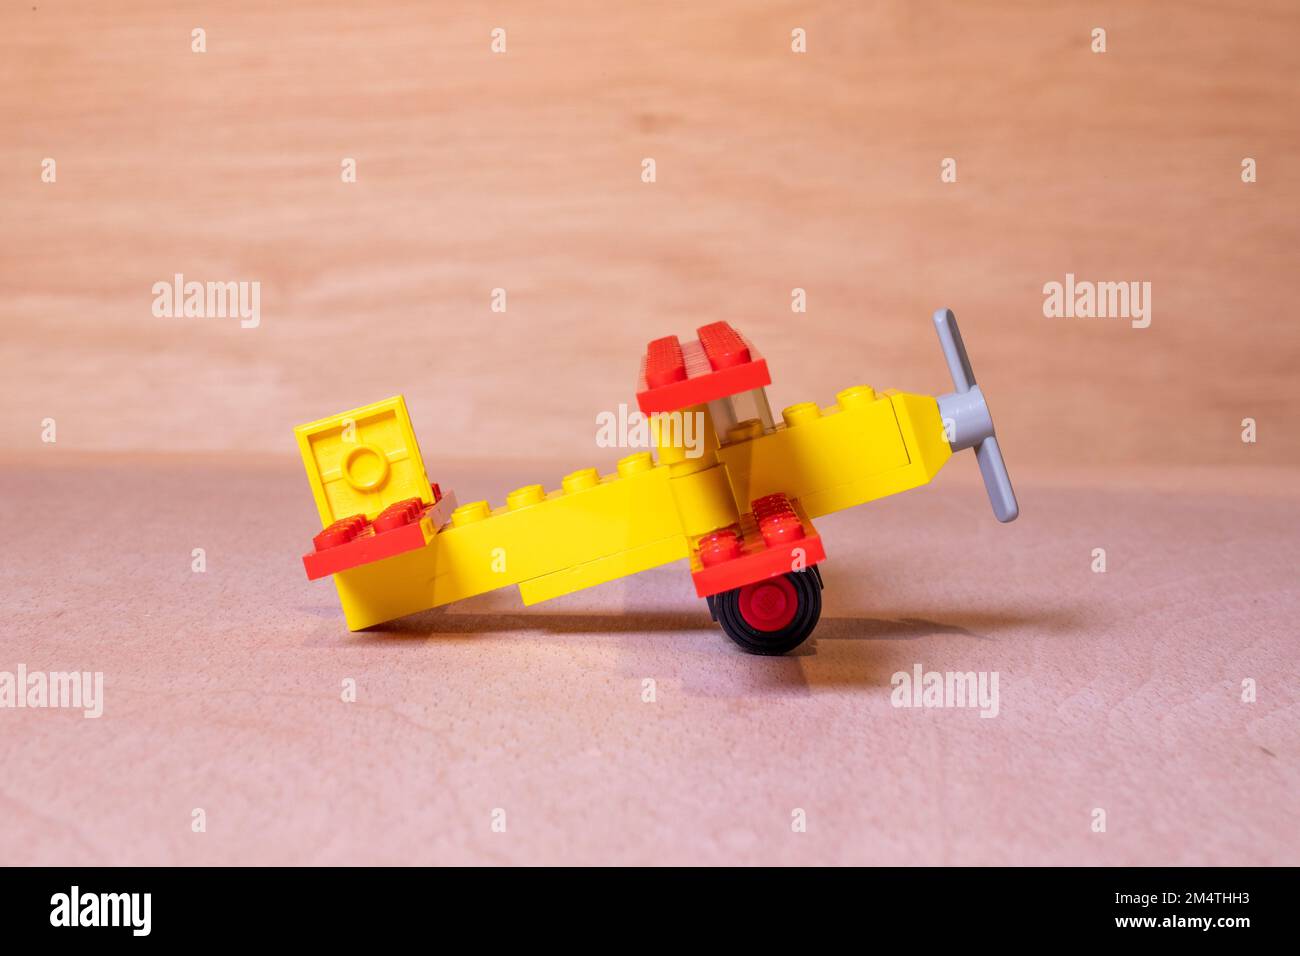 A closeup shot of a lego 613: Biplane set on a wooden surface Stock Photo -  Alamy